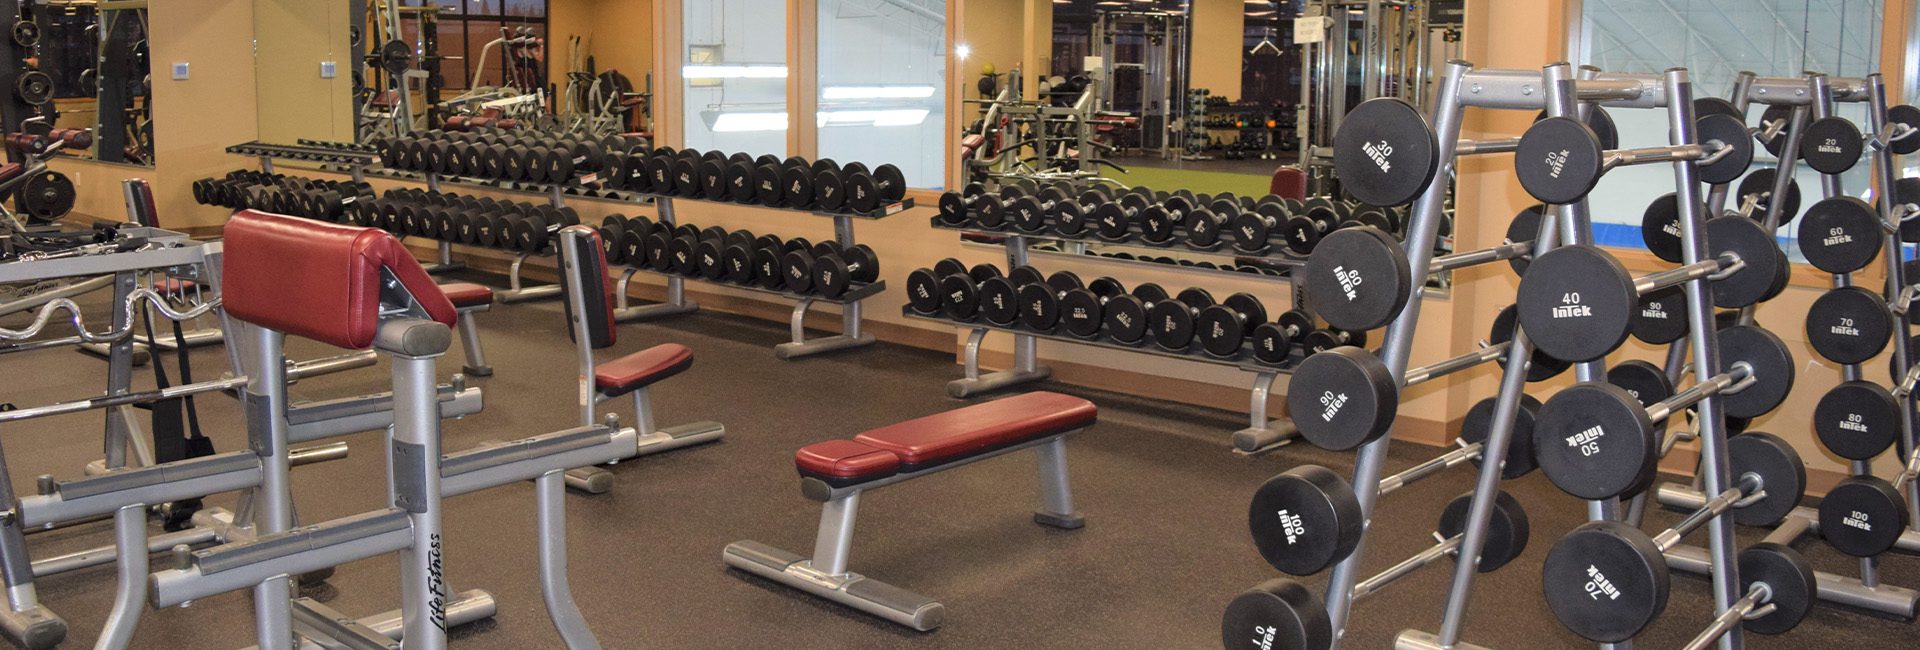 Weight racks and benches